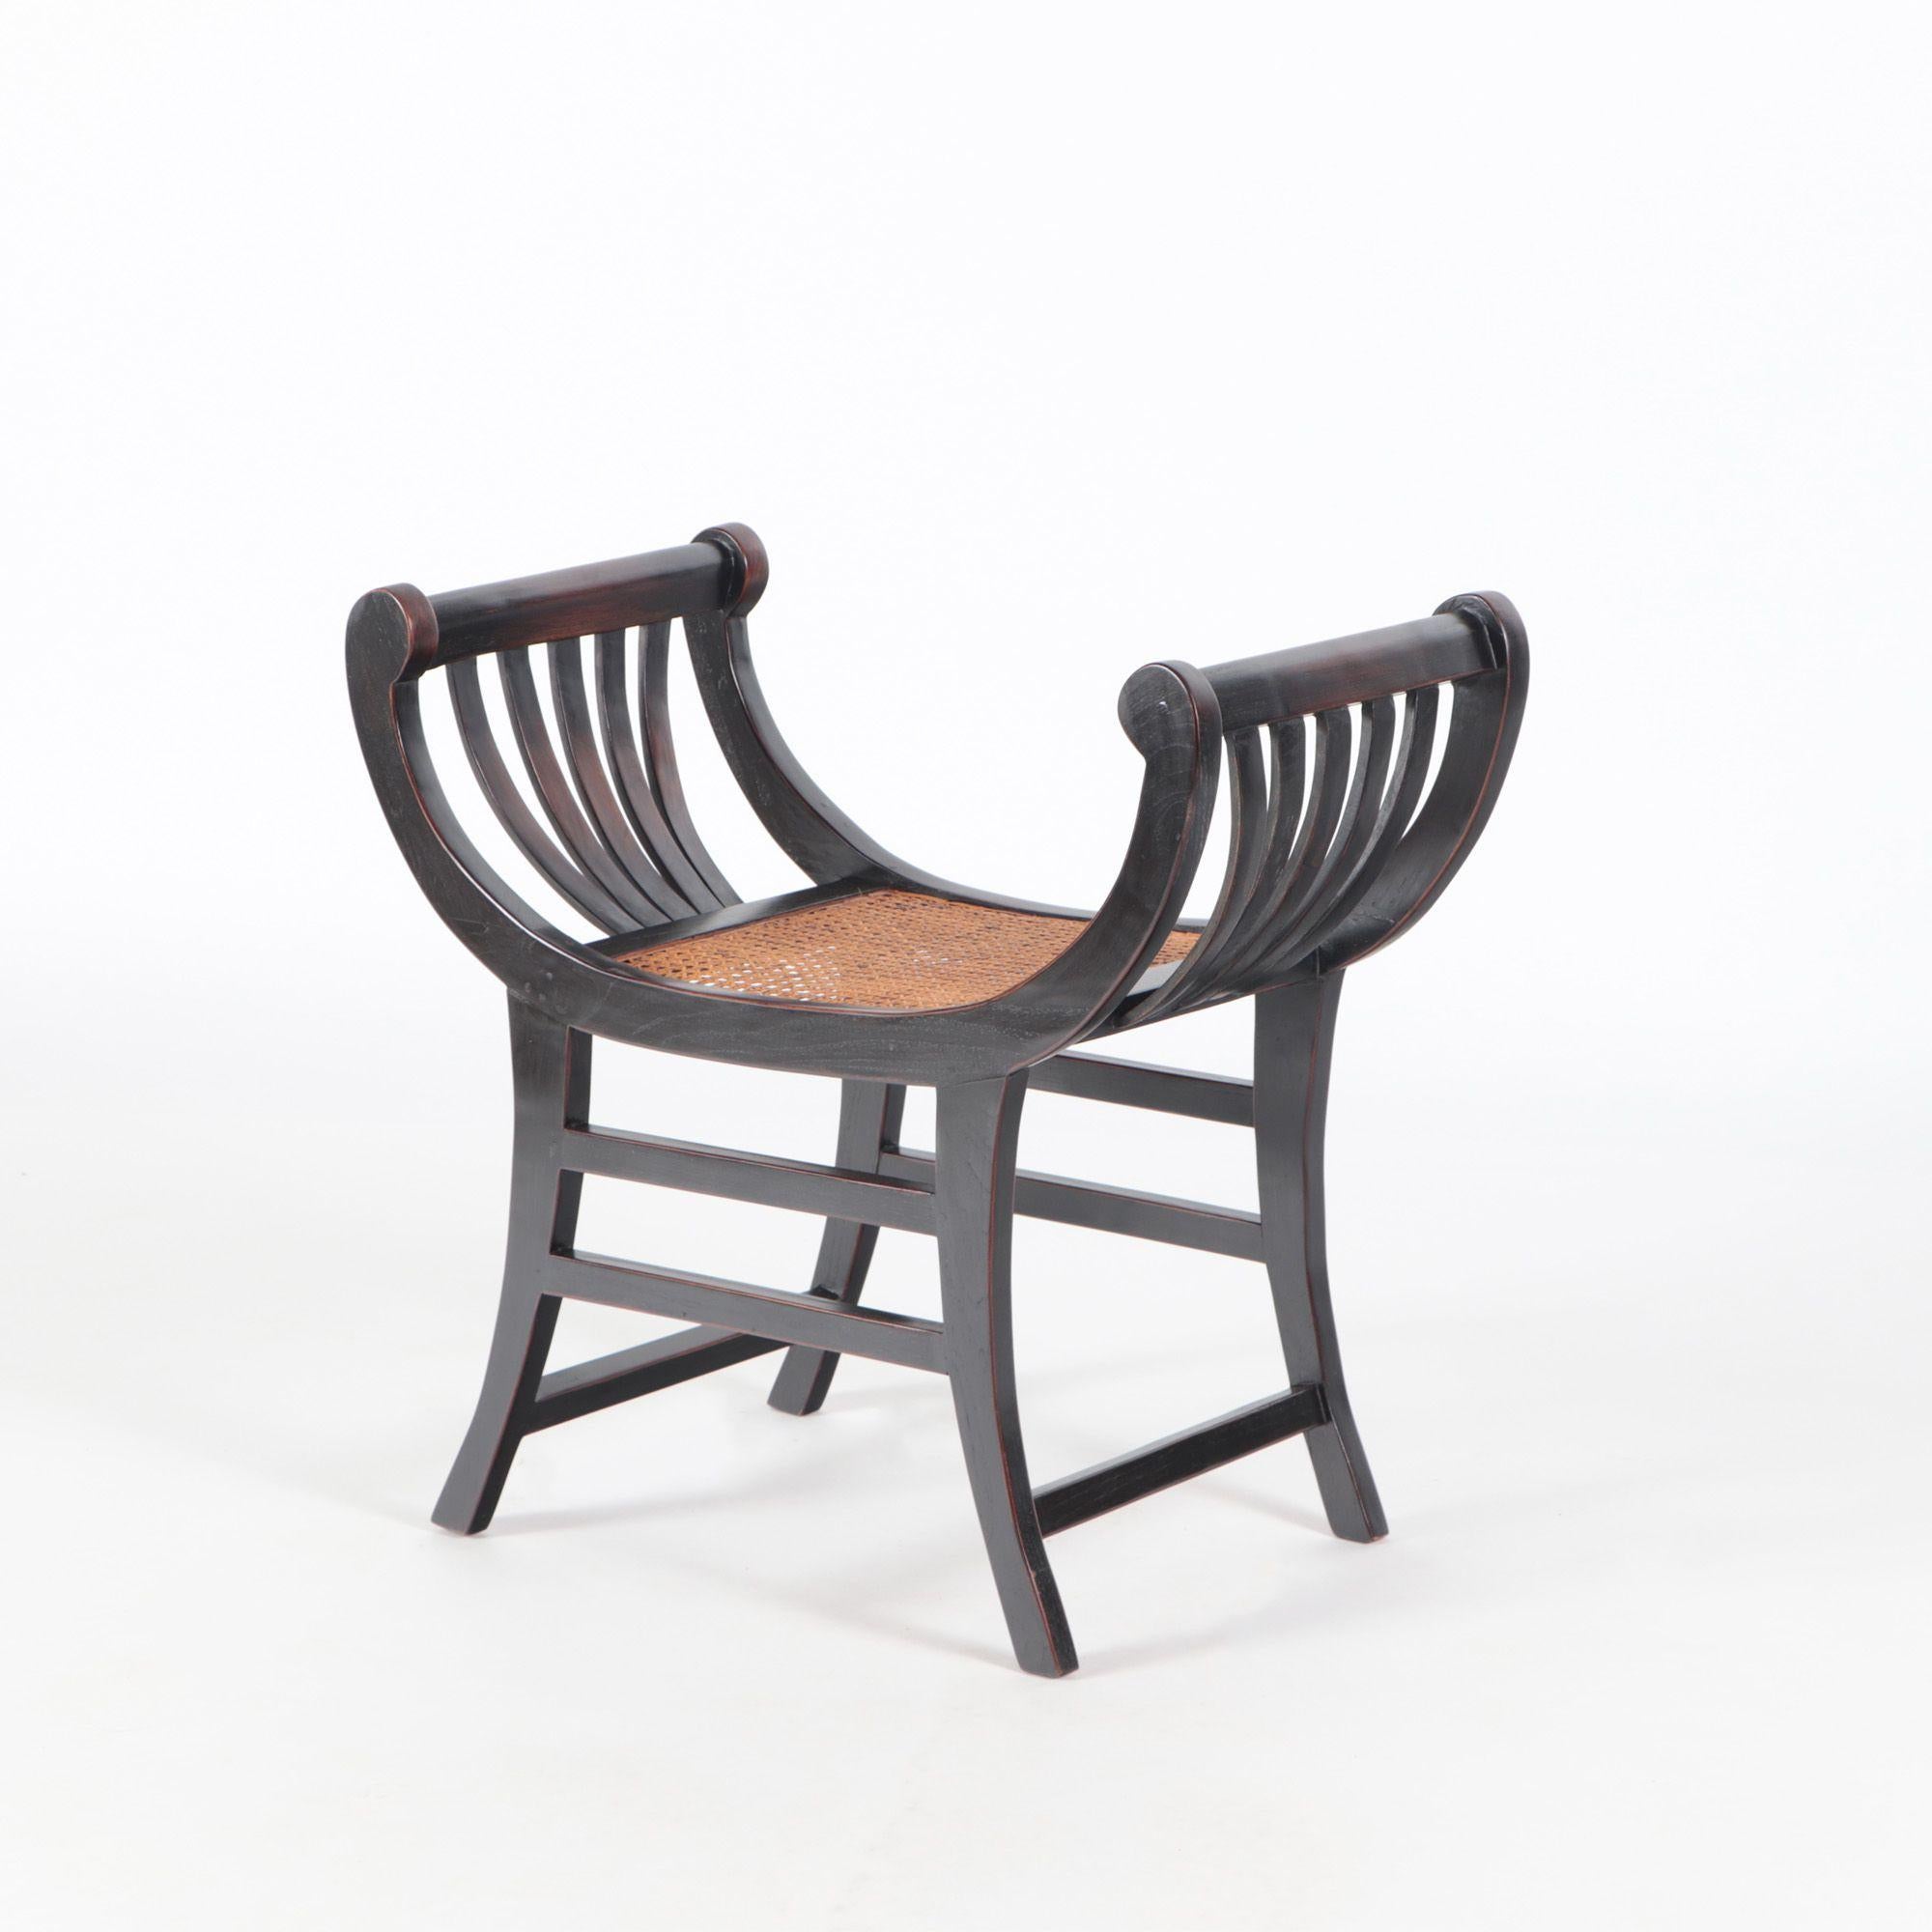 A pair of black teak rattan curved Sartika stools benches from Indonesia.